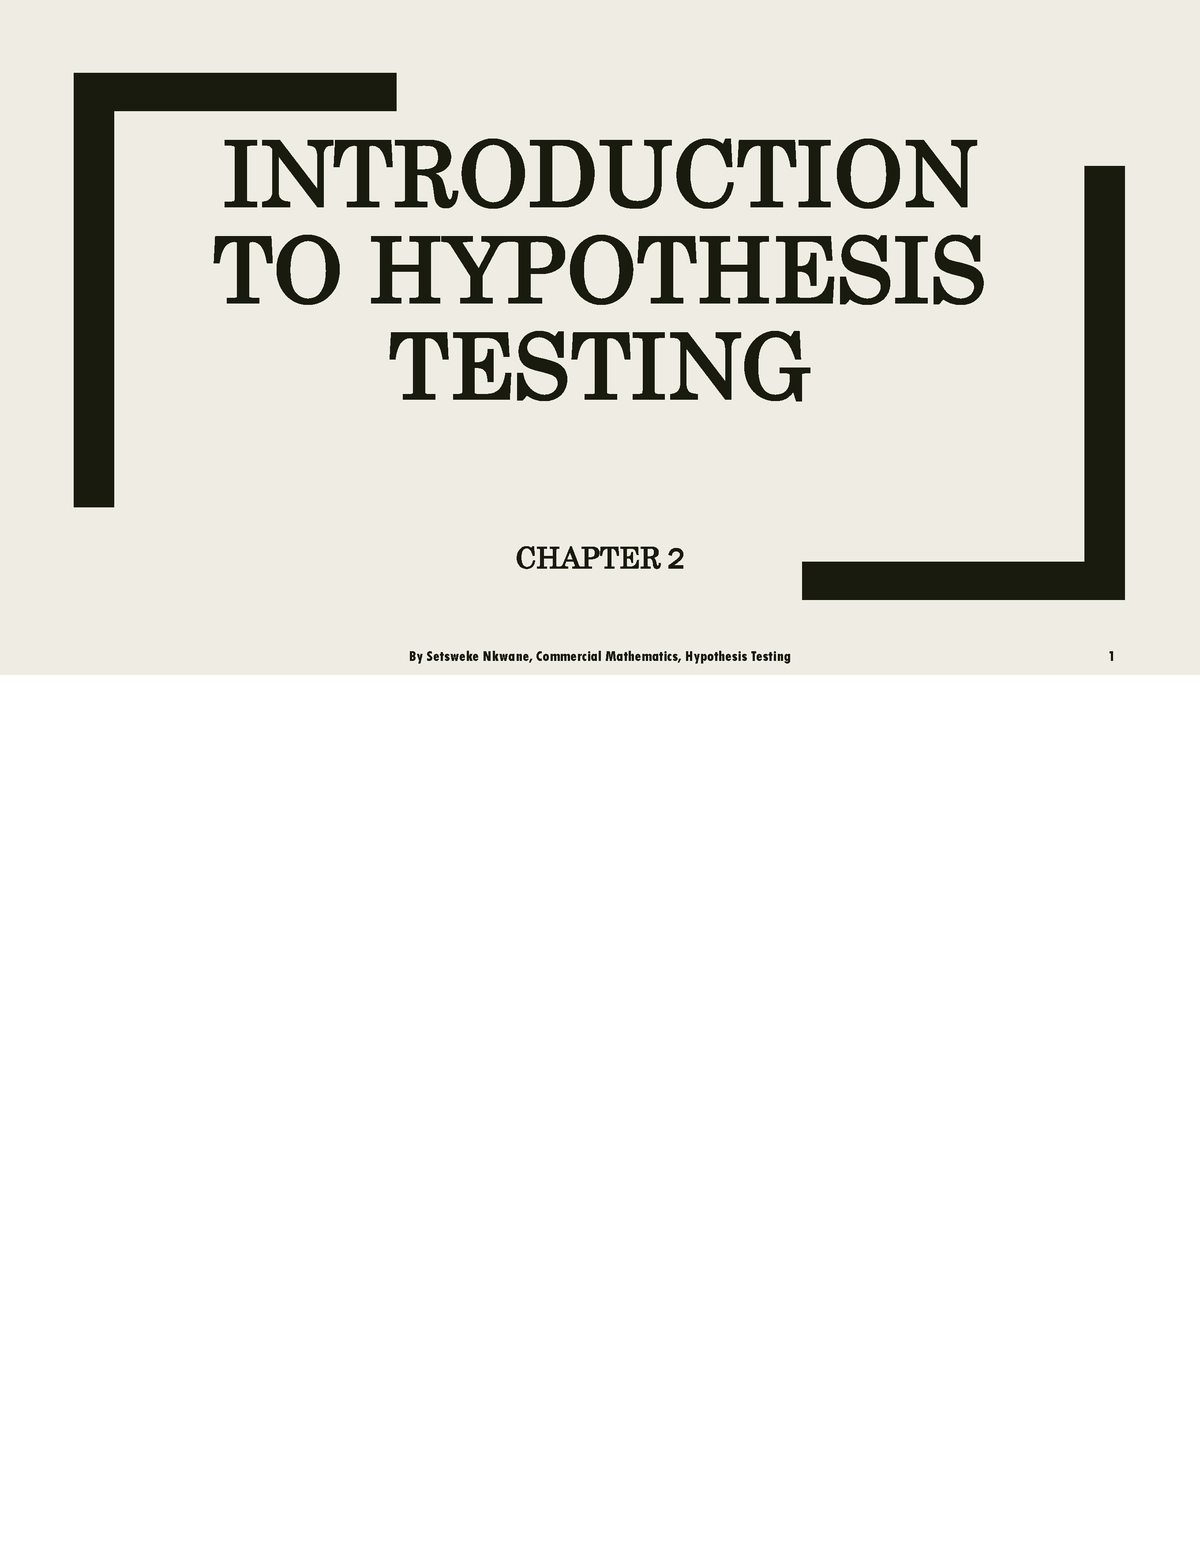 hypothesis in research chapter 2